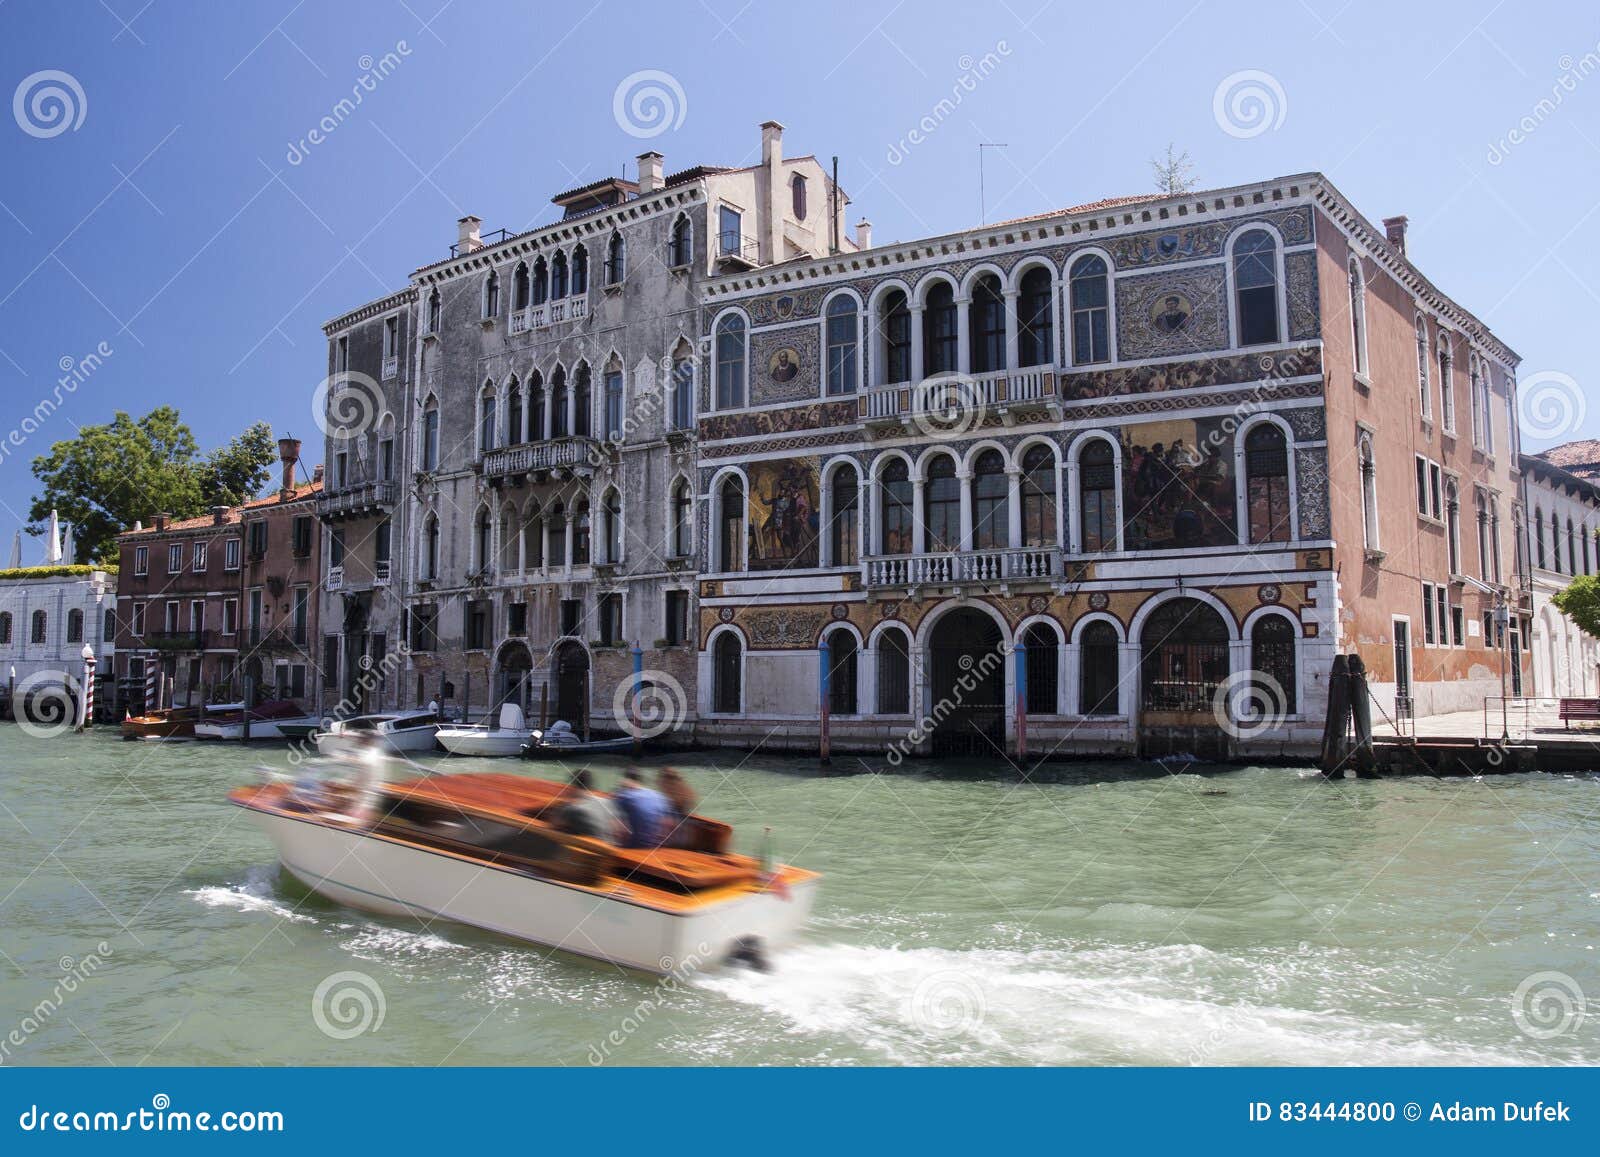 medieval palazzos palaces on grand canal in venice